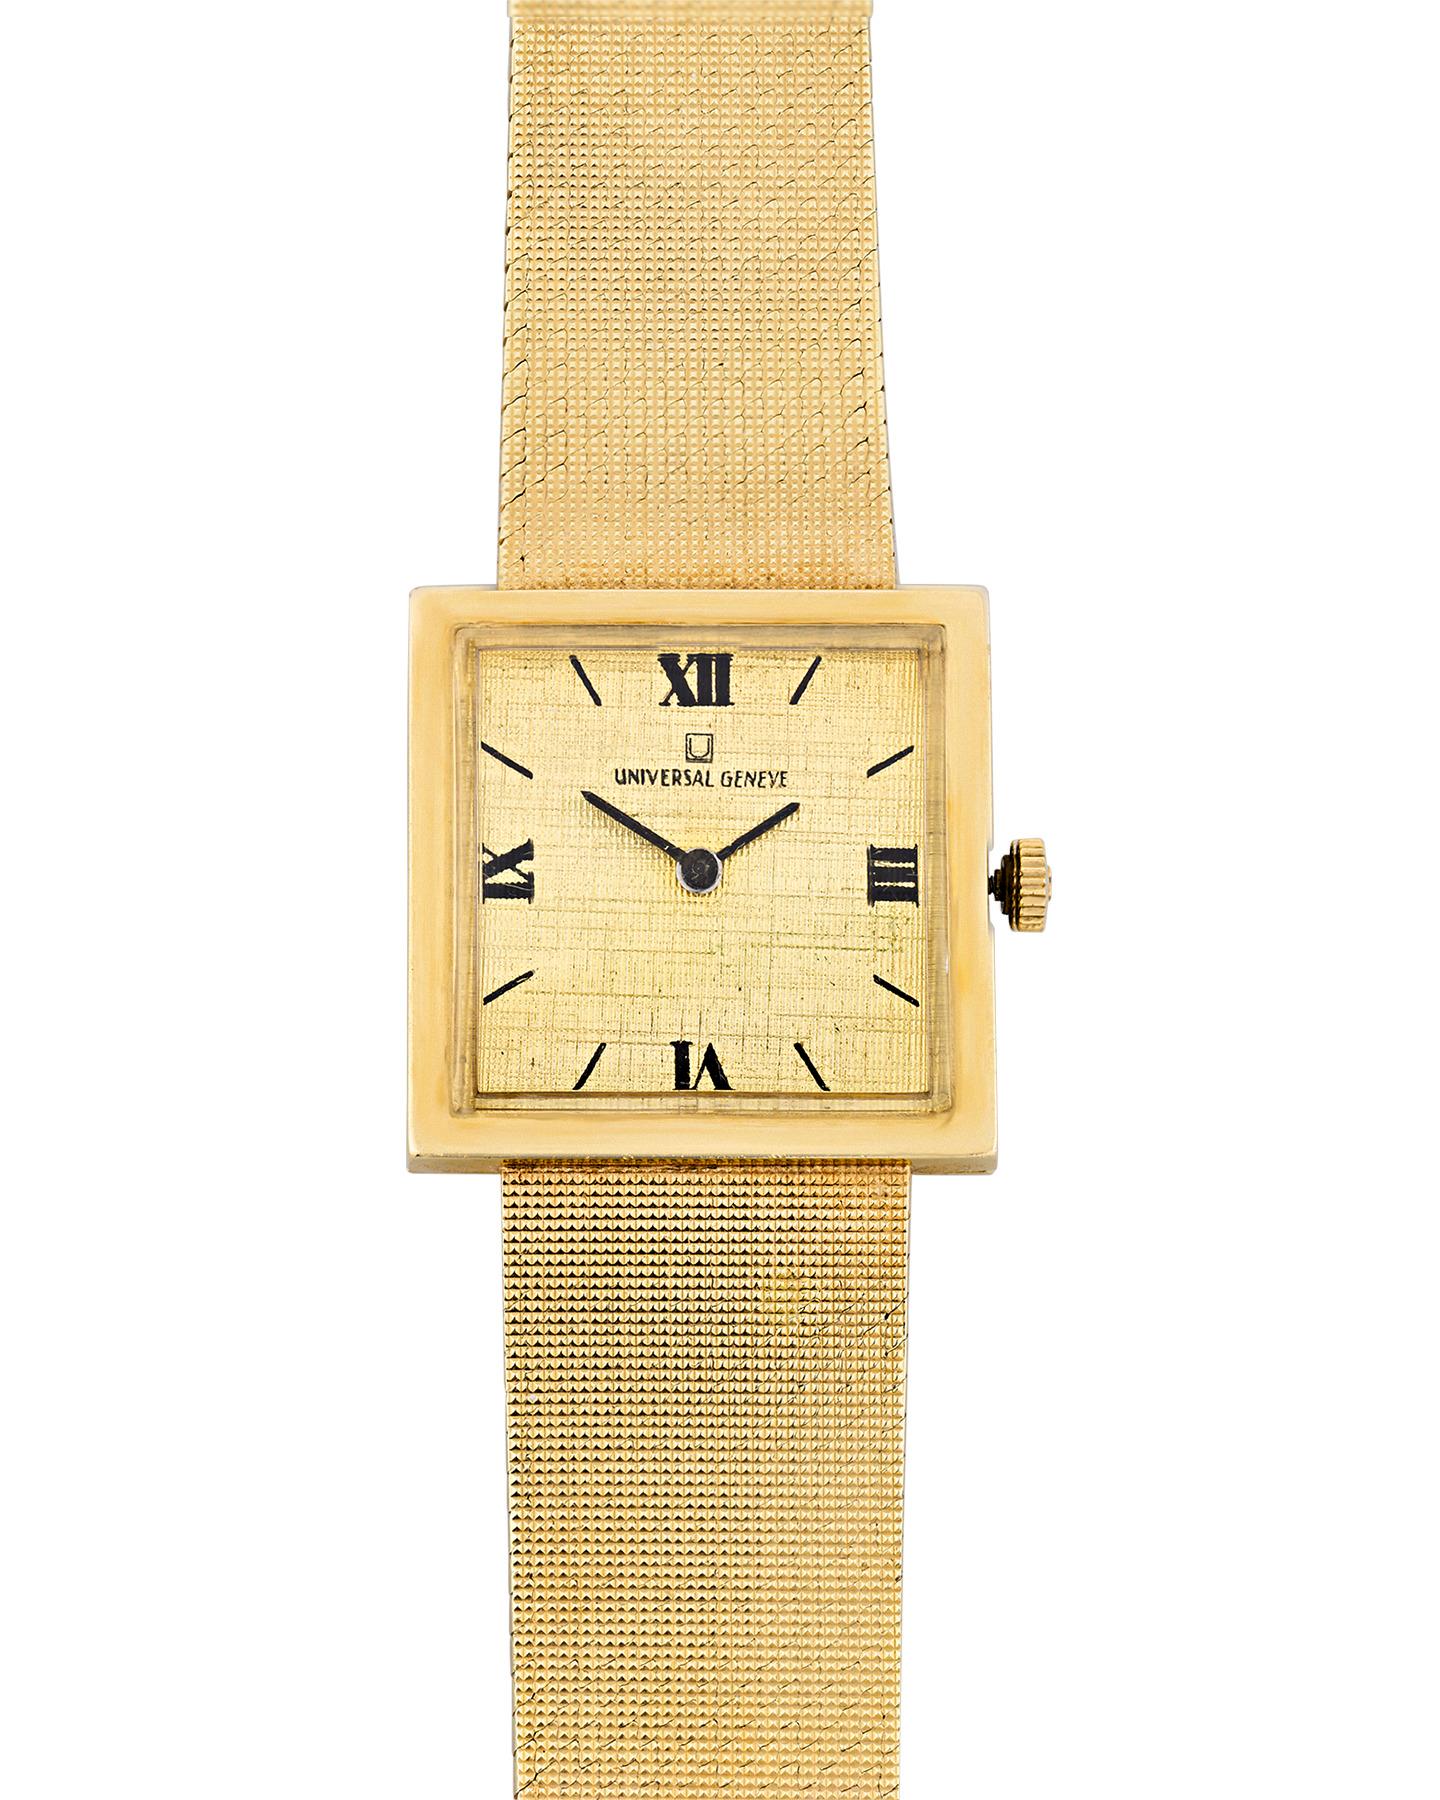 Once worn by the most celebrated cultural icon of the 20th century, this 14K yellow gold watch was owned by Elvis Presley. The watch was later gifted by Elvis to his close friend Dr. Elias Ghanem in the mid to late 1970s. The Universal Geneve